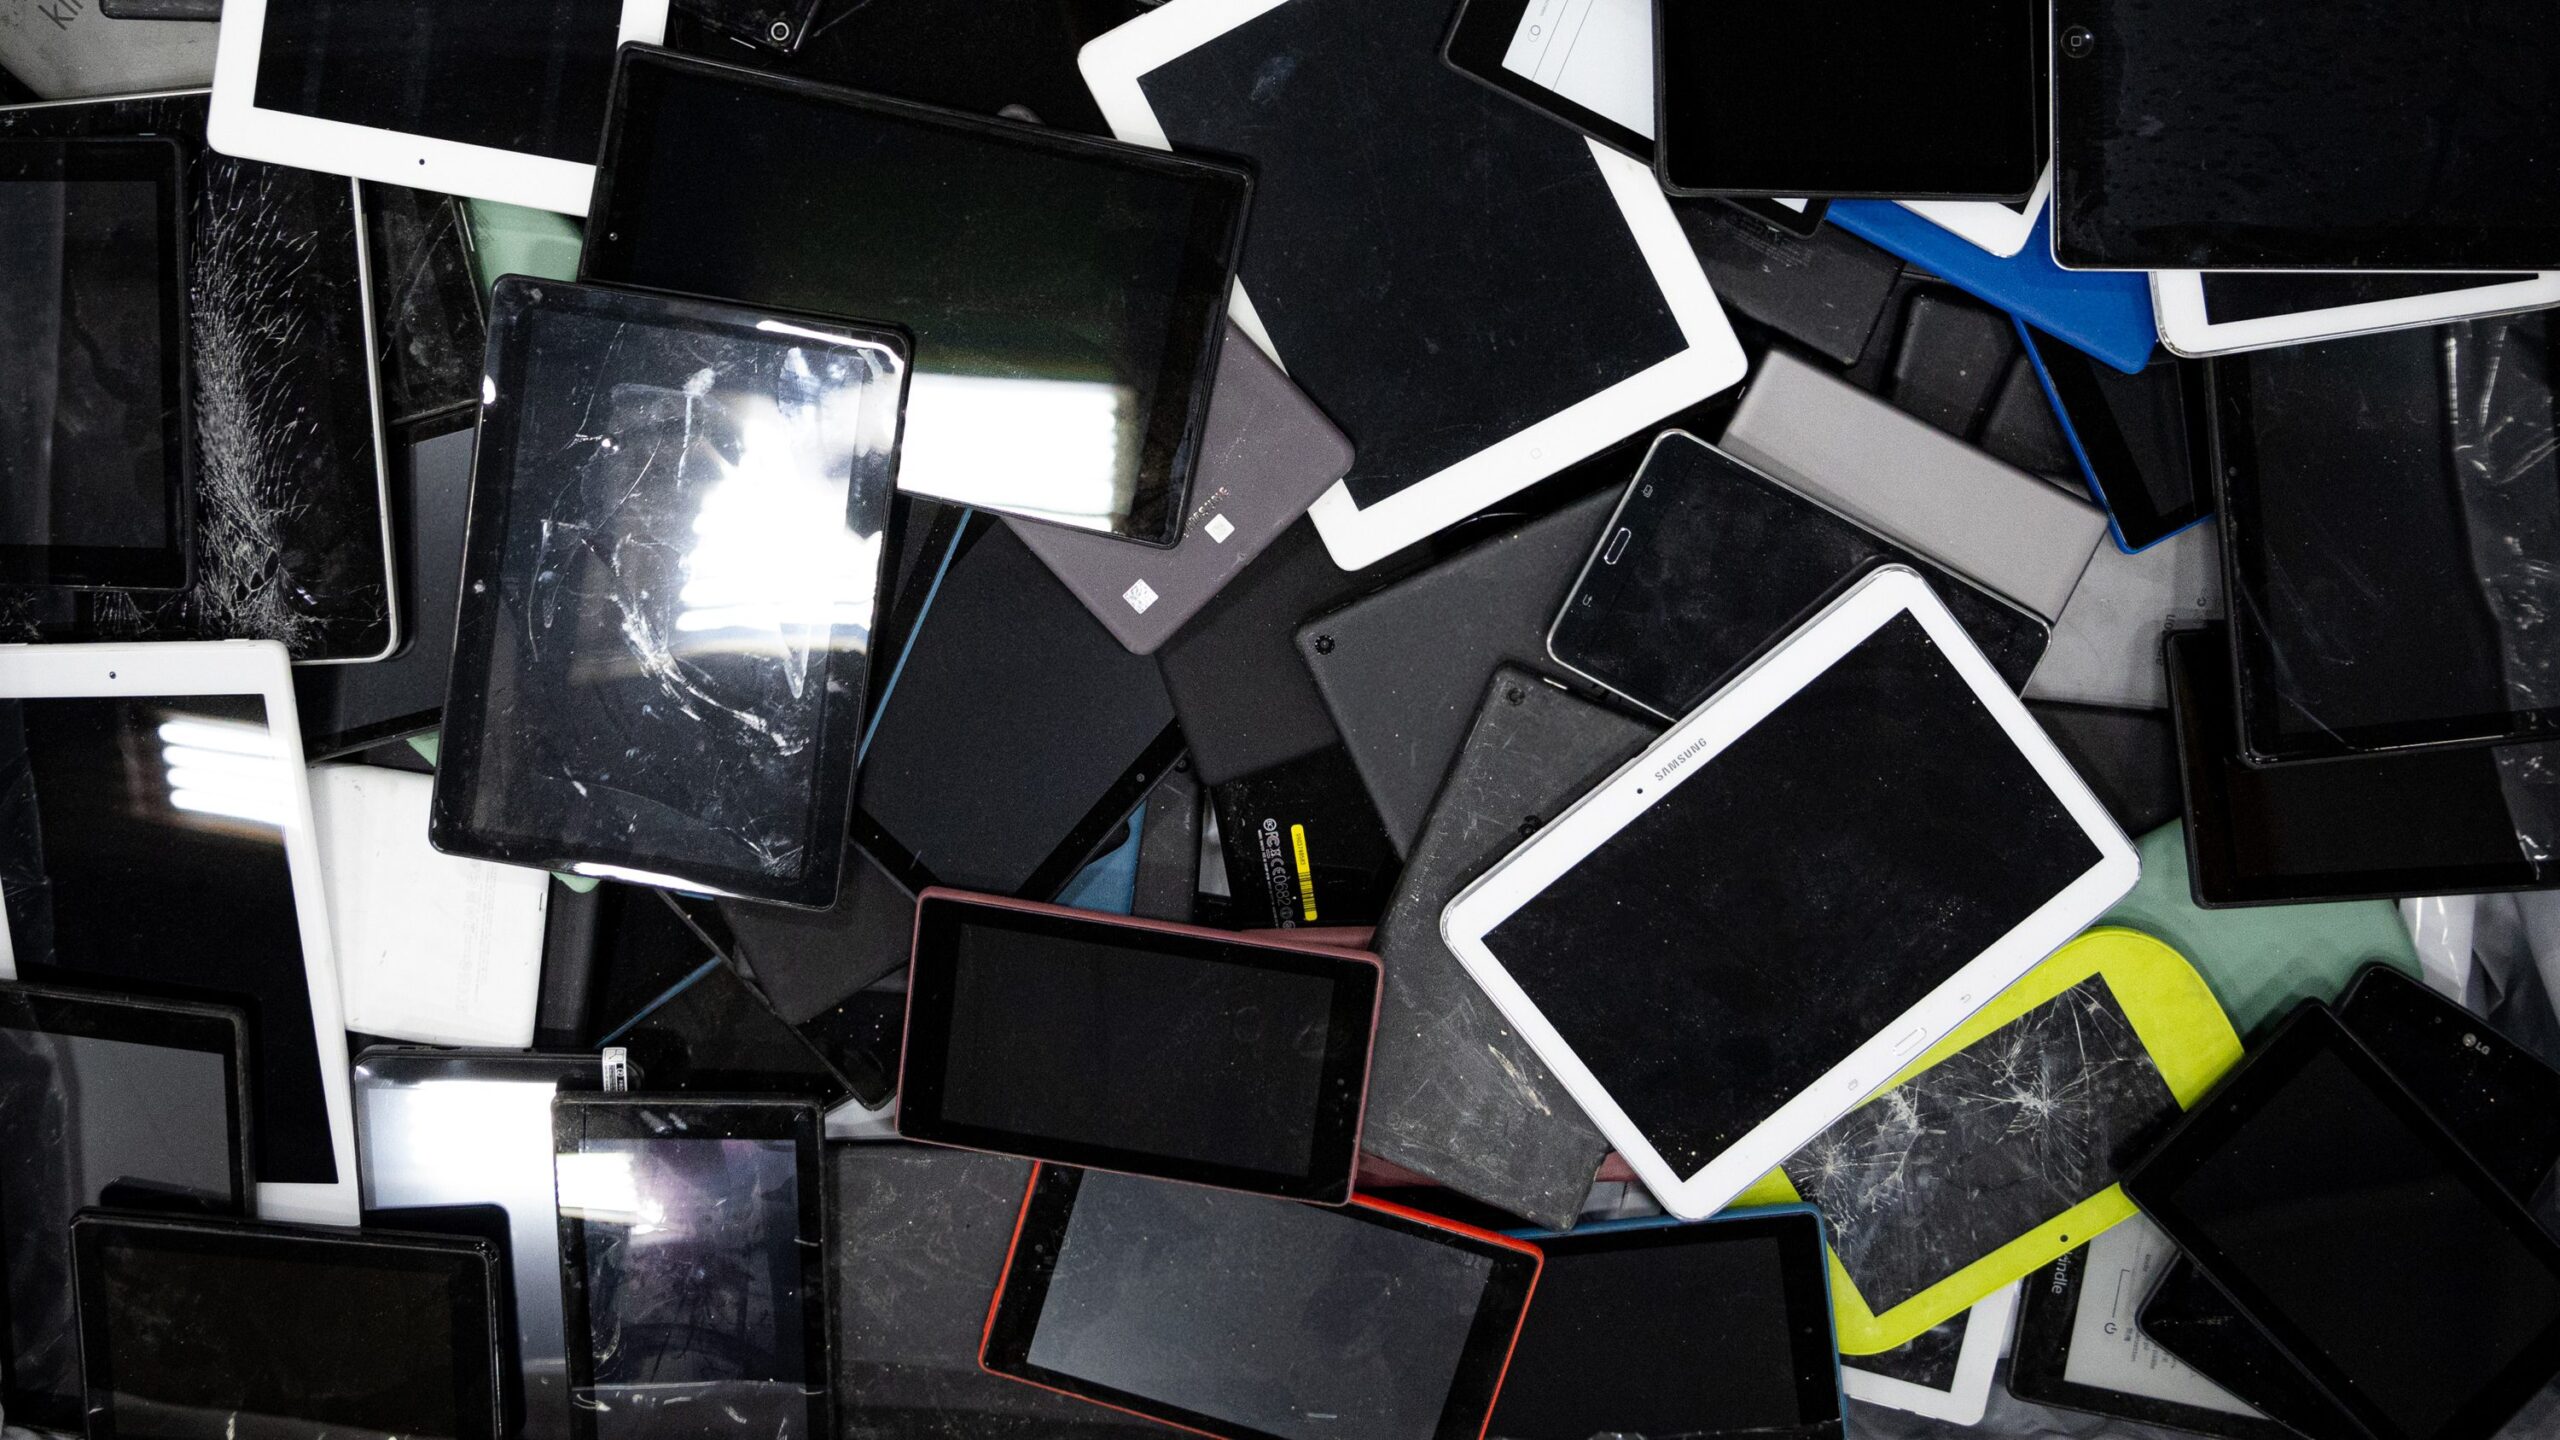 pile of broken tablets and phones